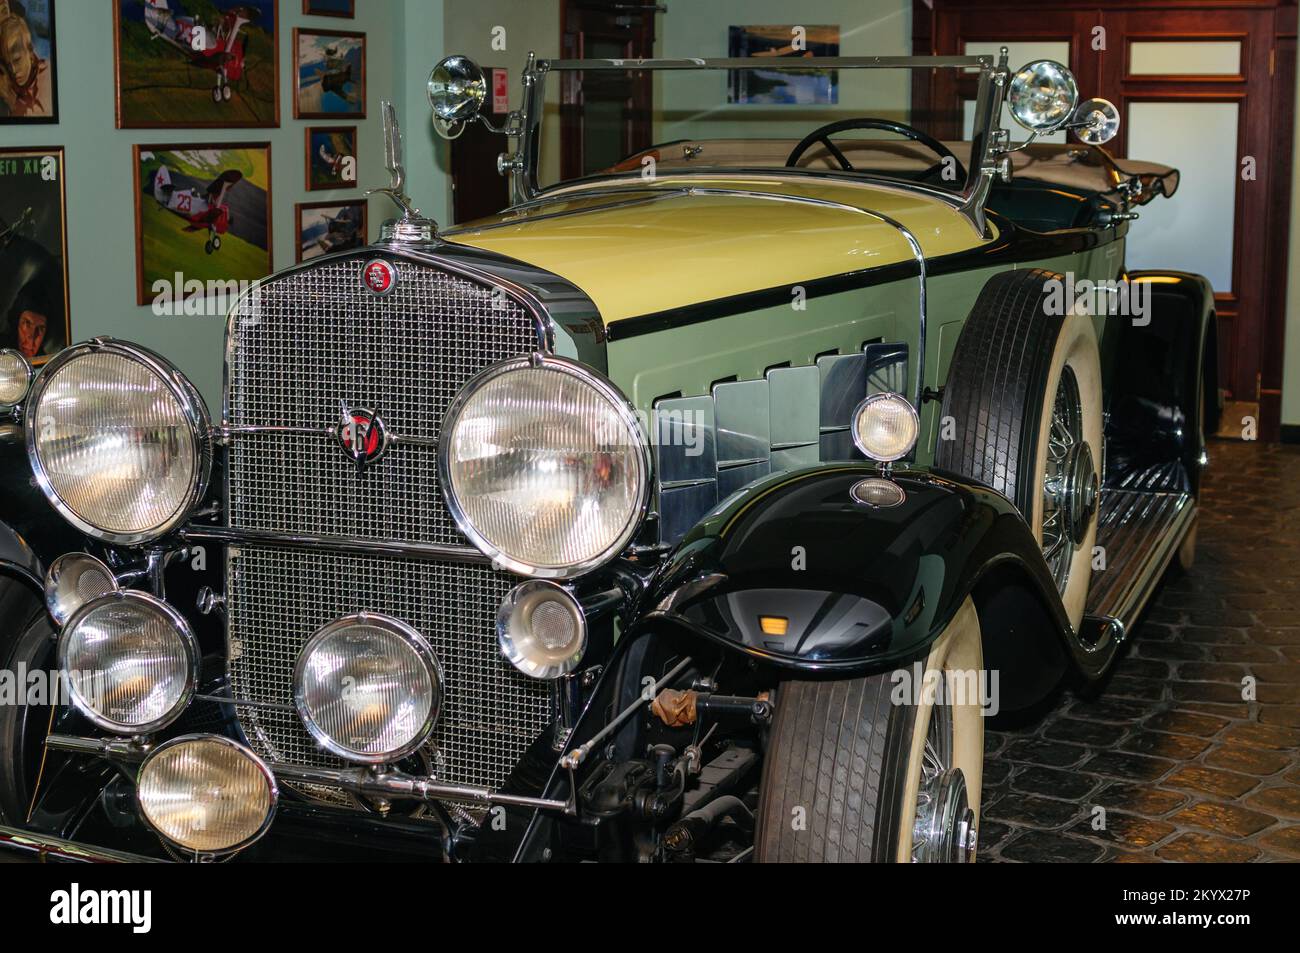 Moscow region, Russia, June 06, 2010. Vintage car 1930 Cadillac V16 Series 452. Stock Photo